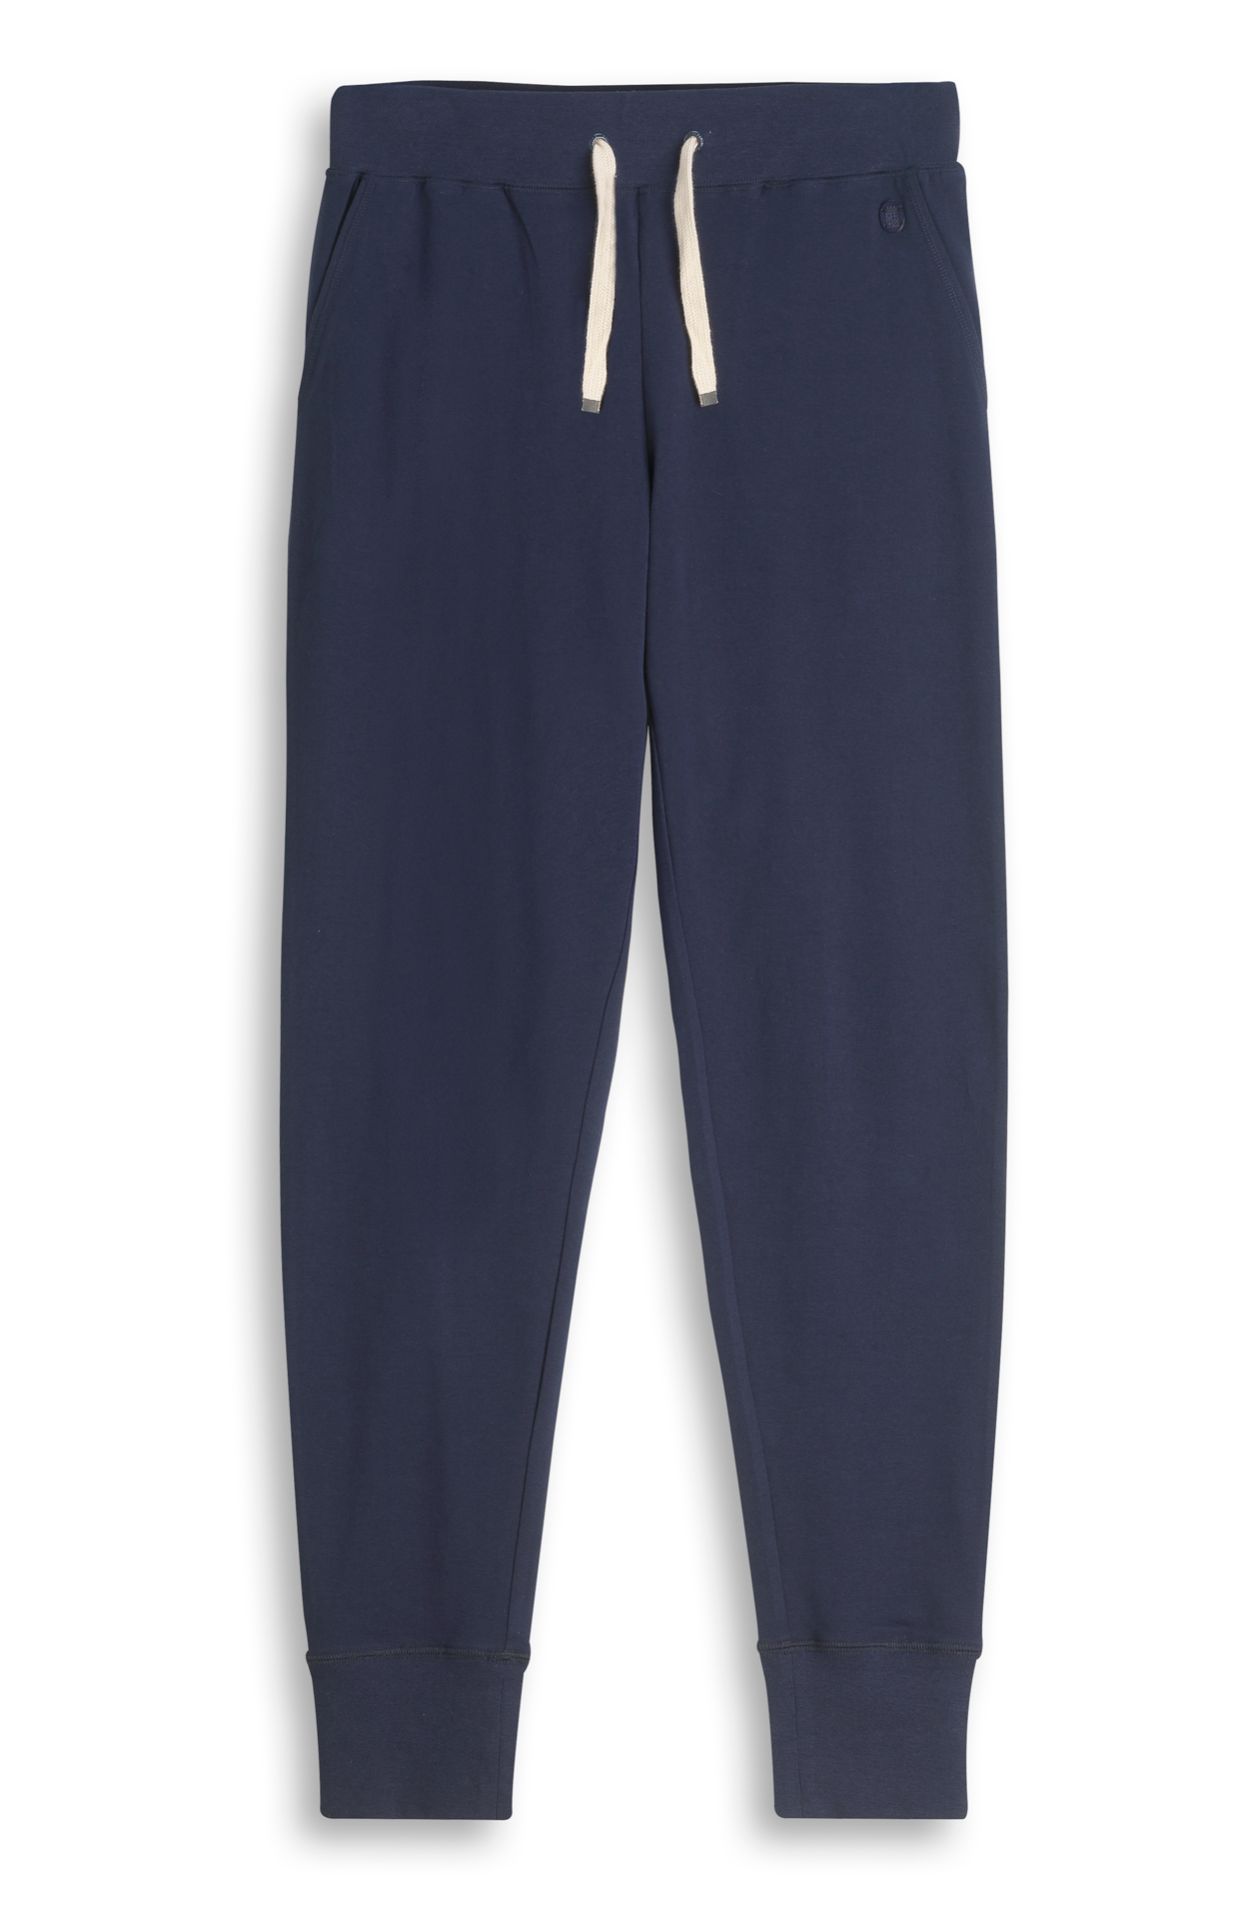 Stretch jersey trousers